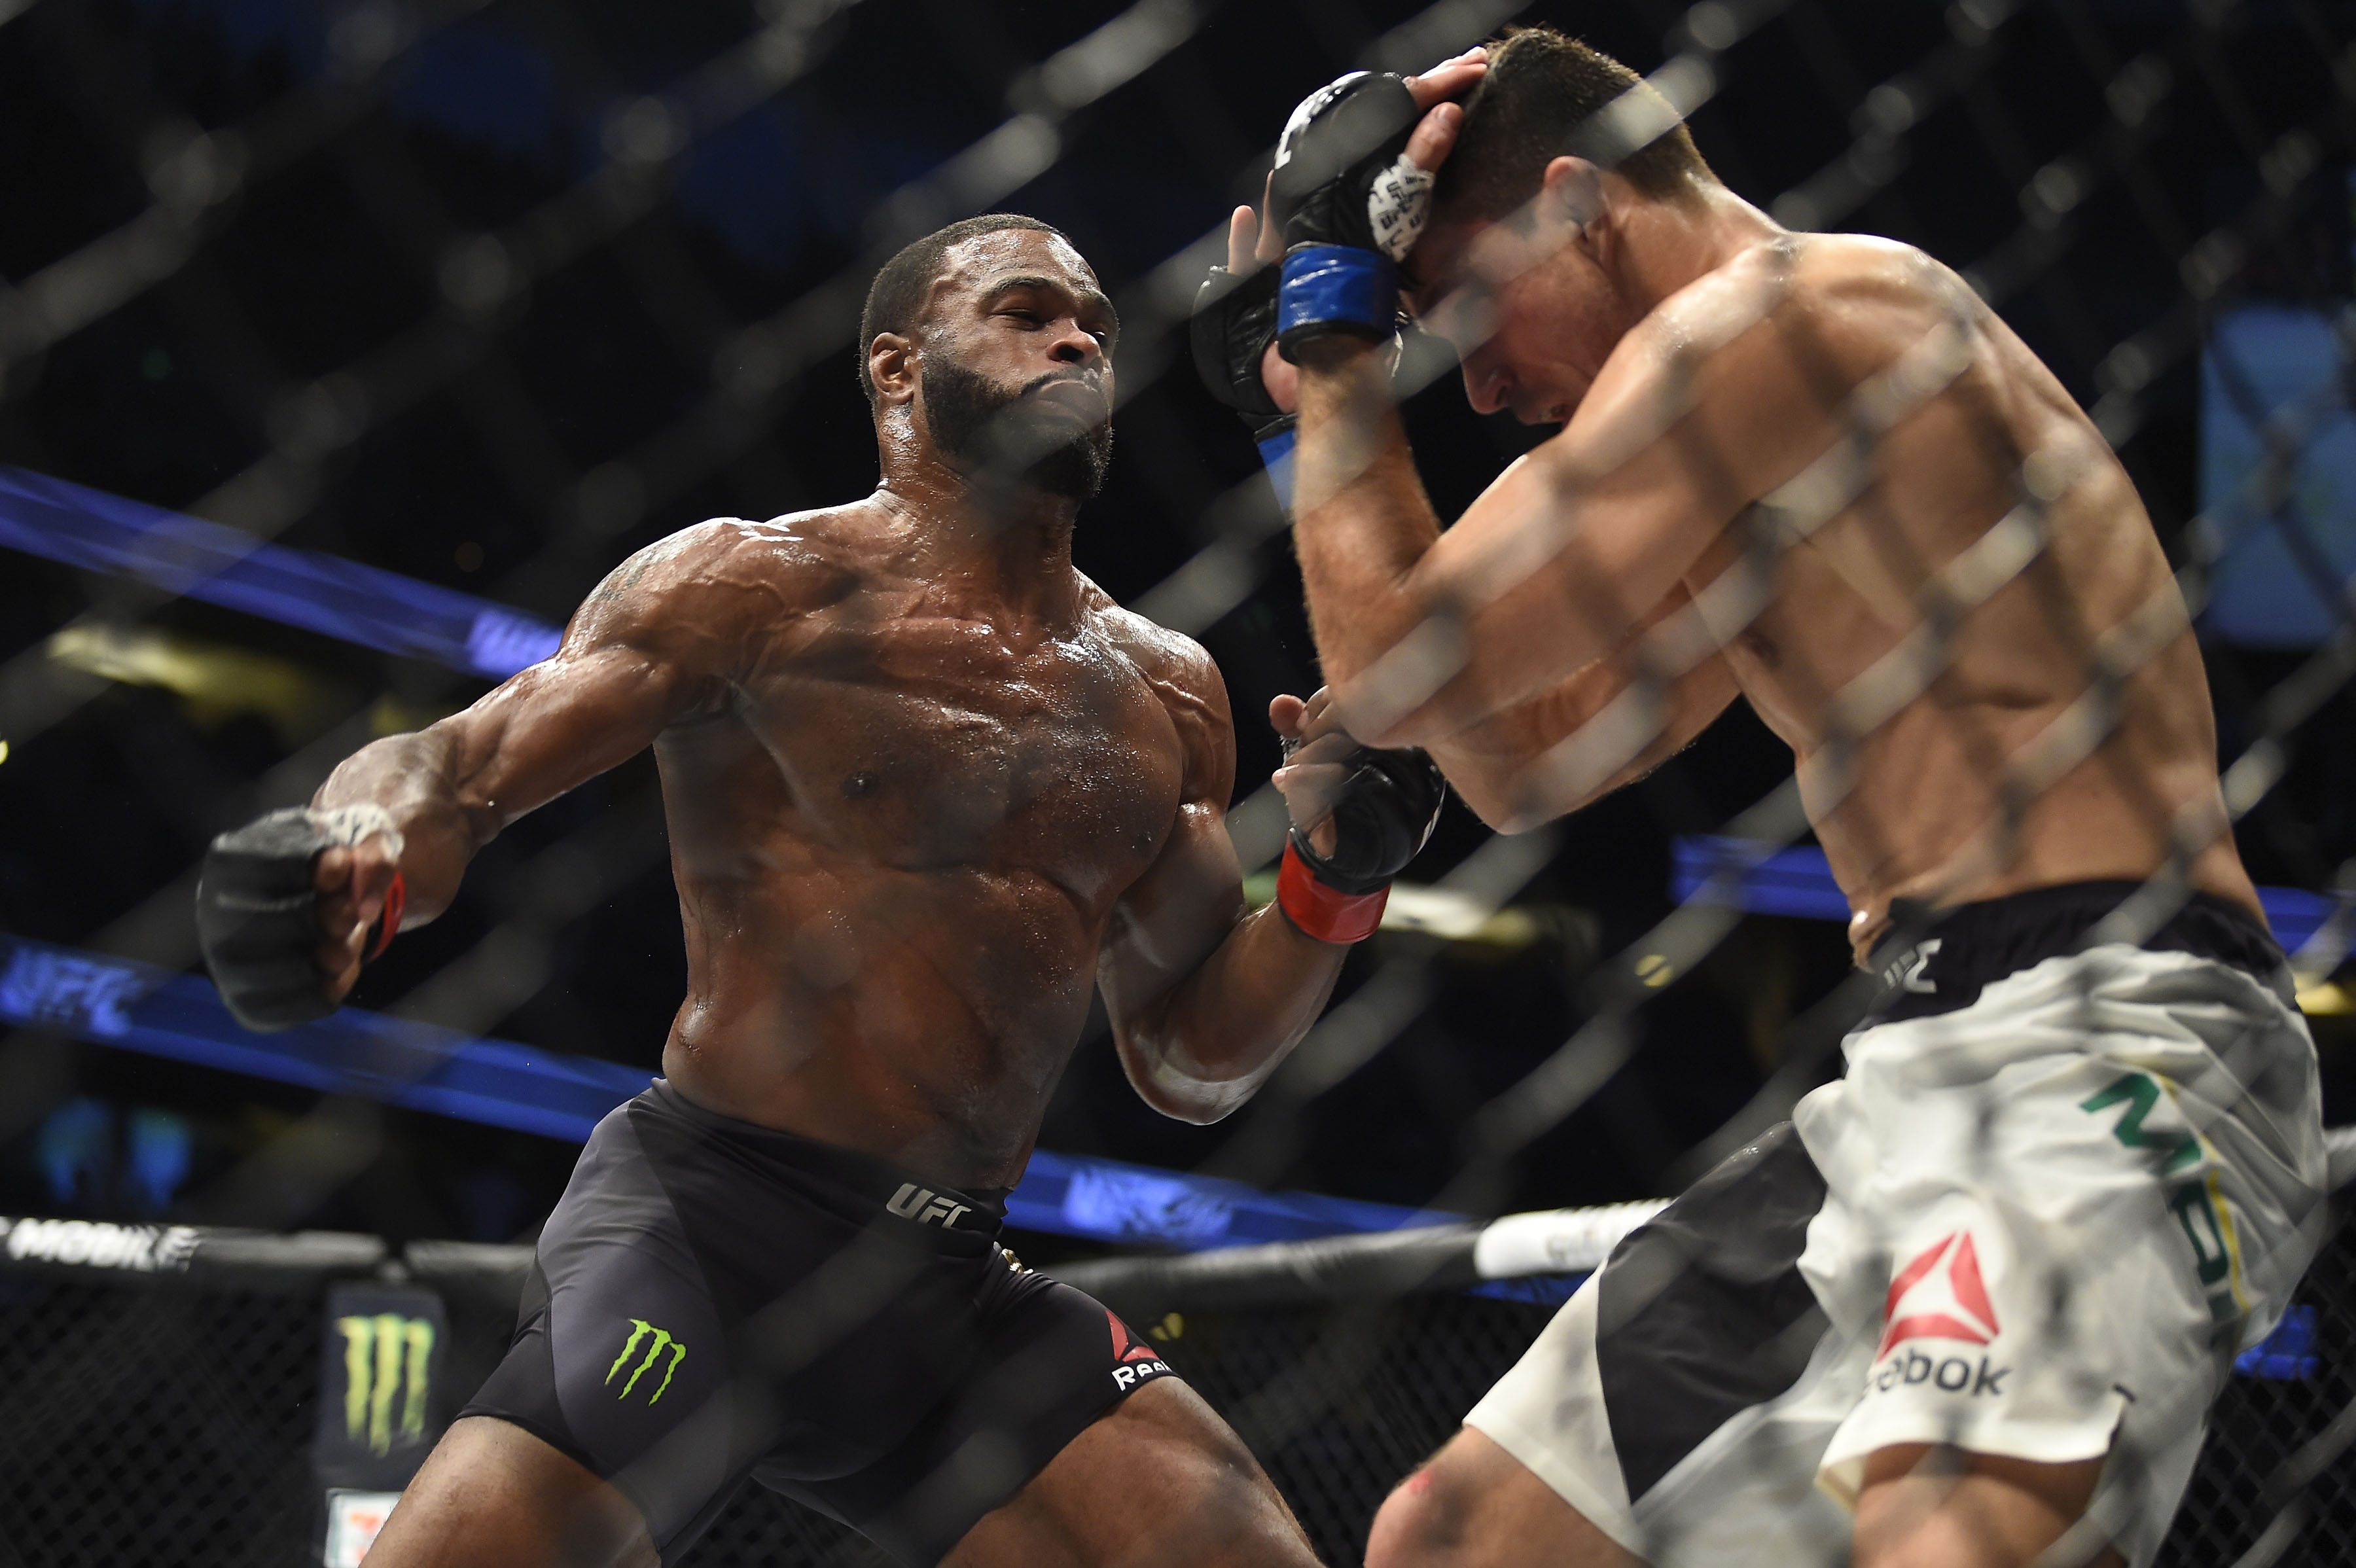 Monster Energy's Tyron 'The Chosen One' Woodley Wins Retains Welterweight Title